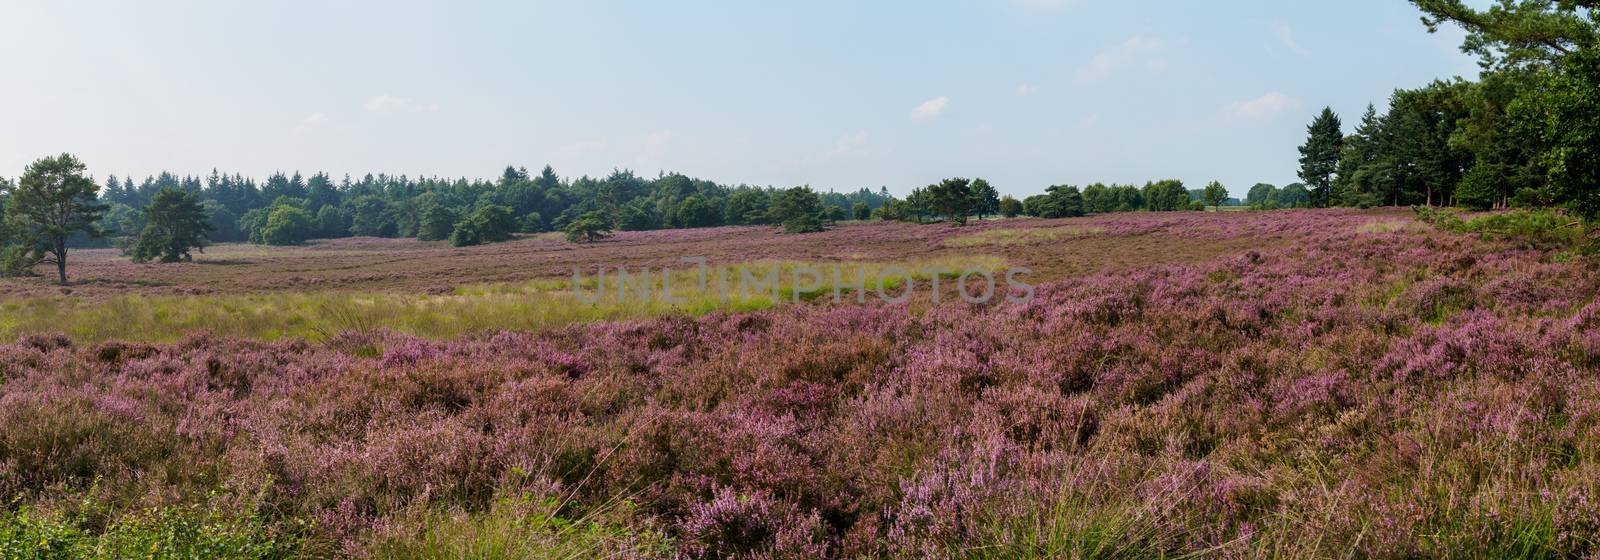 Wide panorama of a Dutch heathland area in full bloom